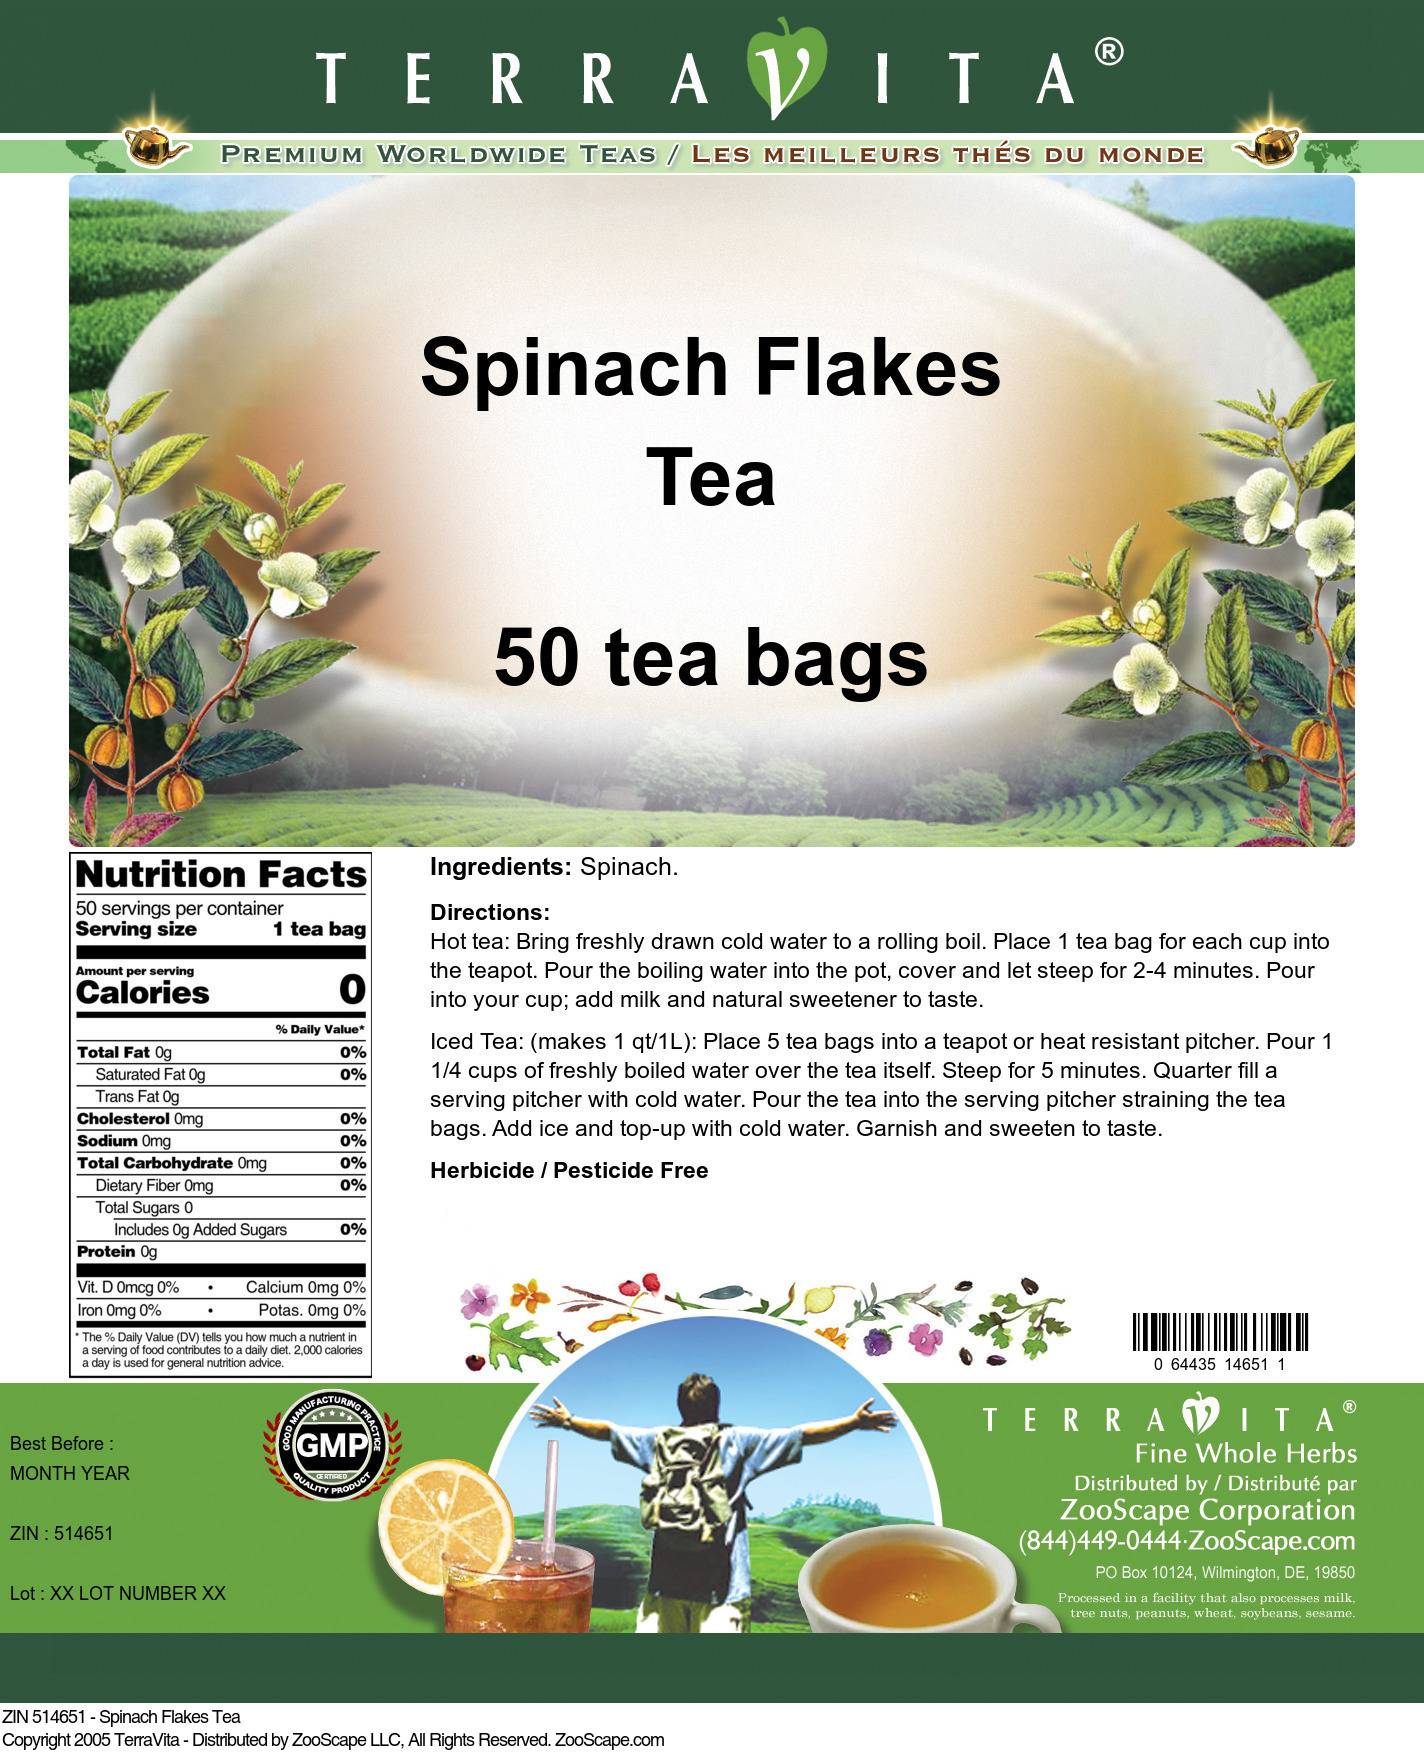 Spinach Flakes Tea - Label